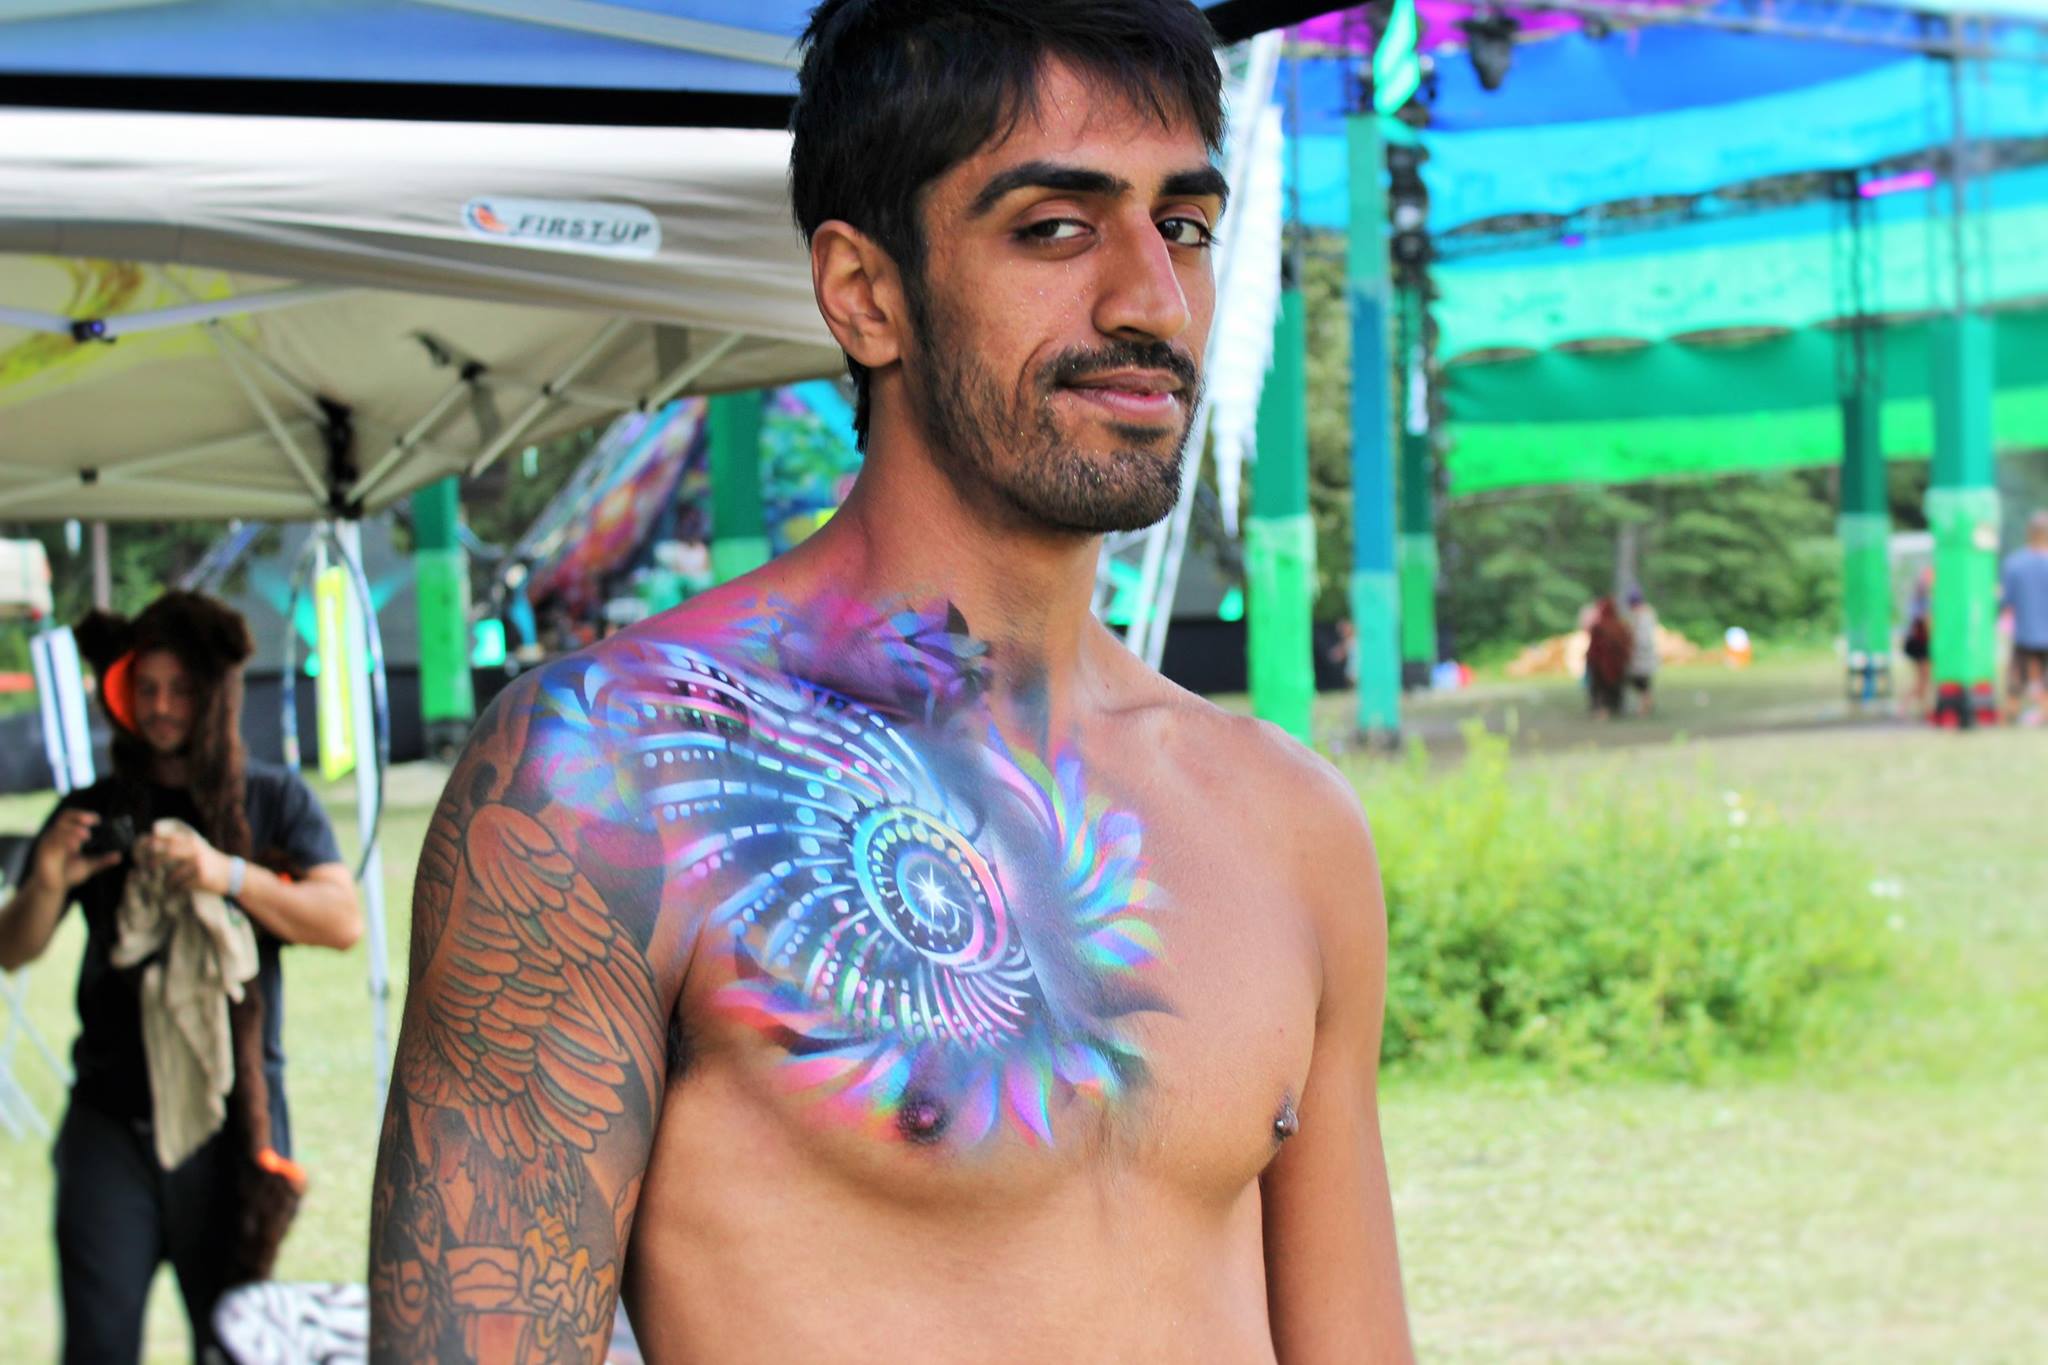 8 Easy Body Painting Ideas That Look Great on Everyone - Metastate Paint